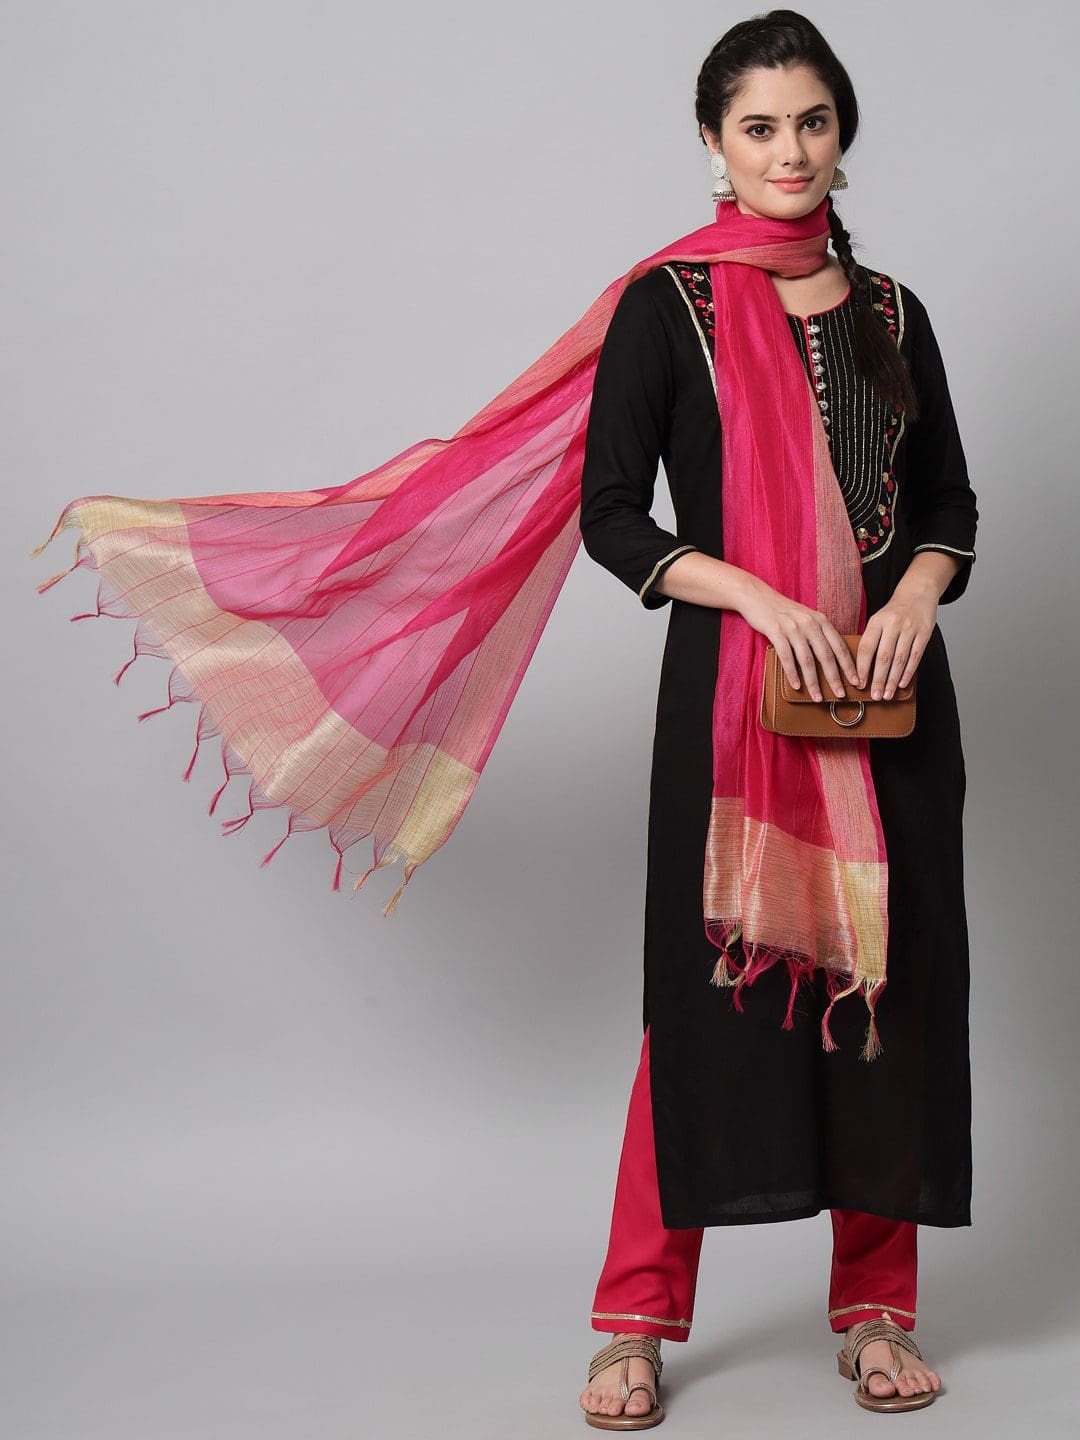 Classy Geometric Black Rayon Printed Embroidered Pure cotton Kurta Trouser Set With Dupatta for Women.